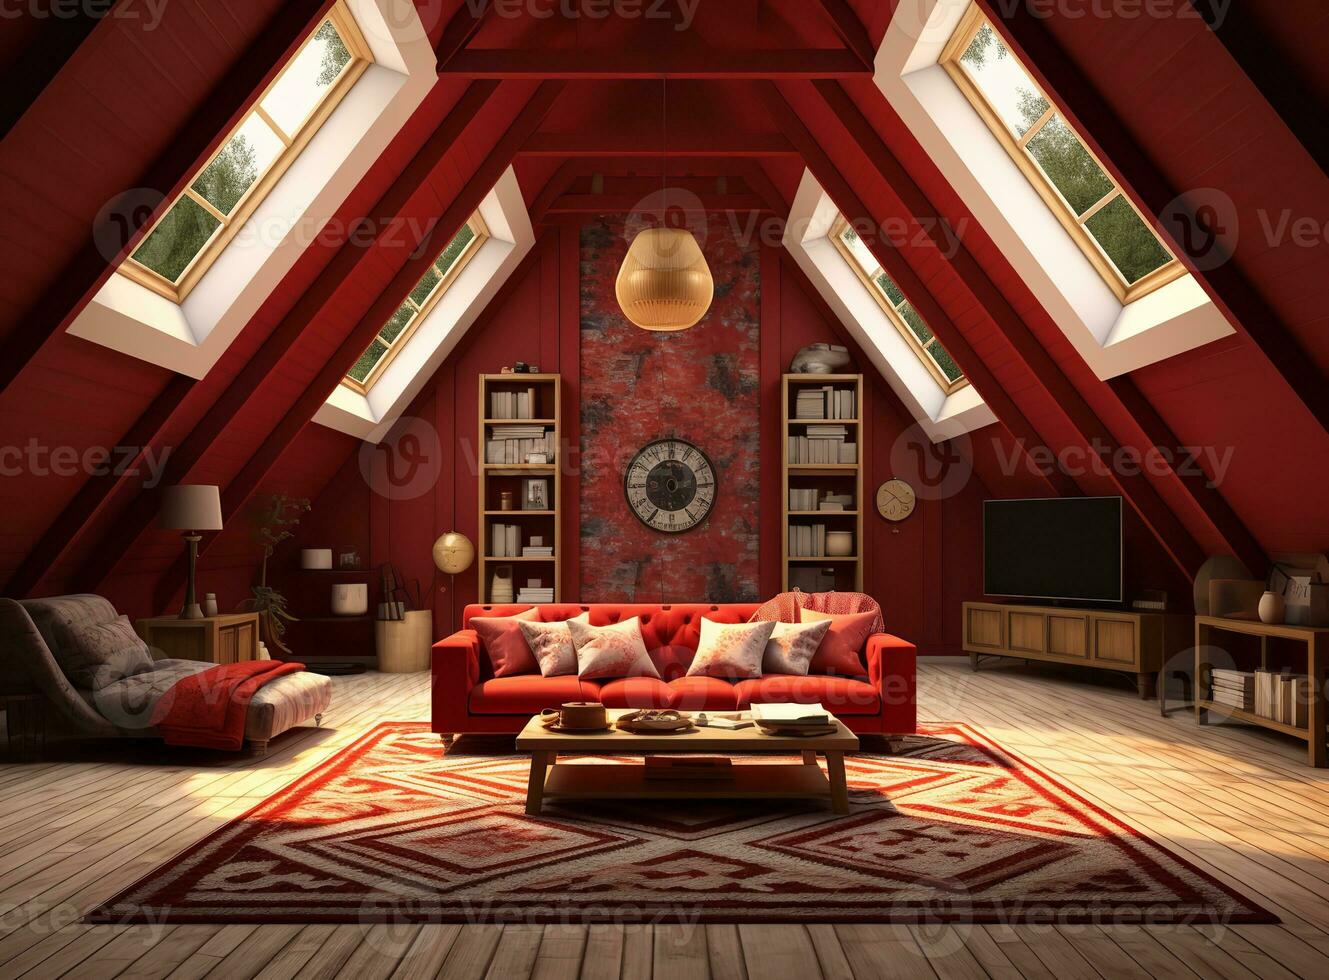 AI generated a 3D rendering of a cozy attic living room with a red color scheme. The room has a wooden floor, a red rug, and a red accent wall. There are several windows, a TV, a sofa, and table. photo